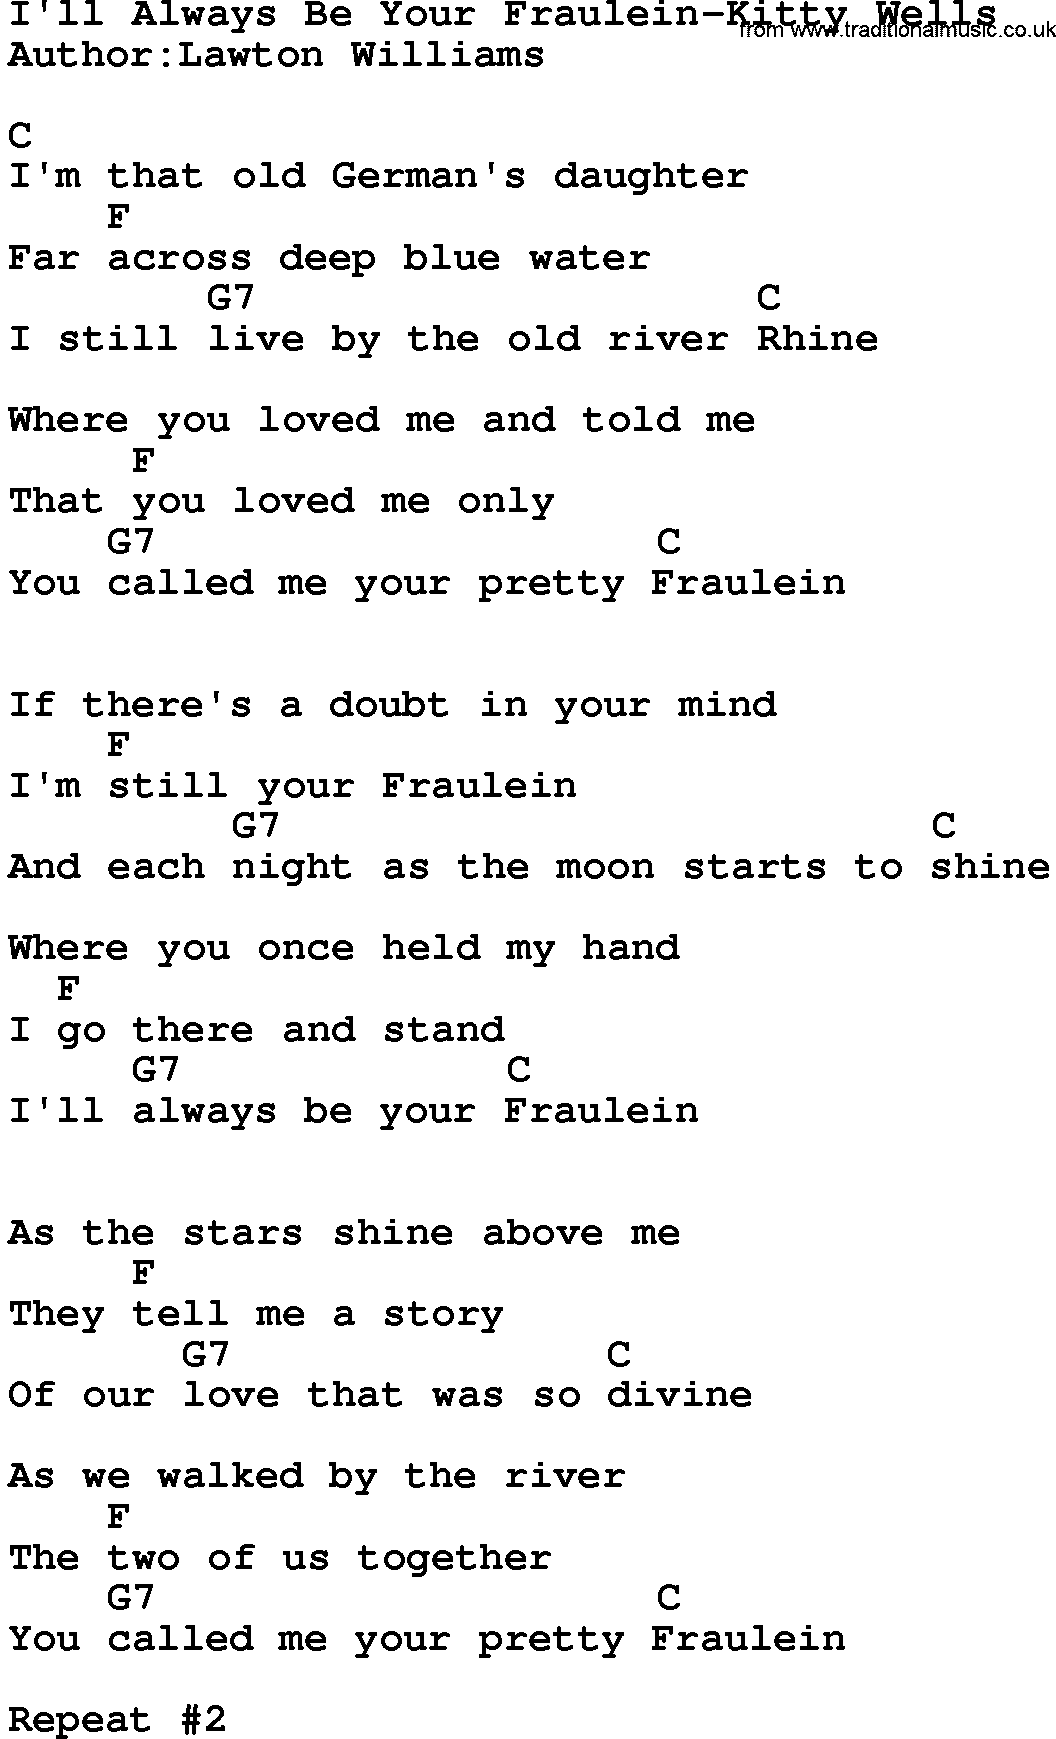 Country music song: I'll Always Be Your Fraulein-Kitty Wells lyrics and chords